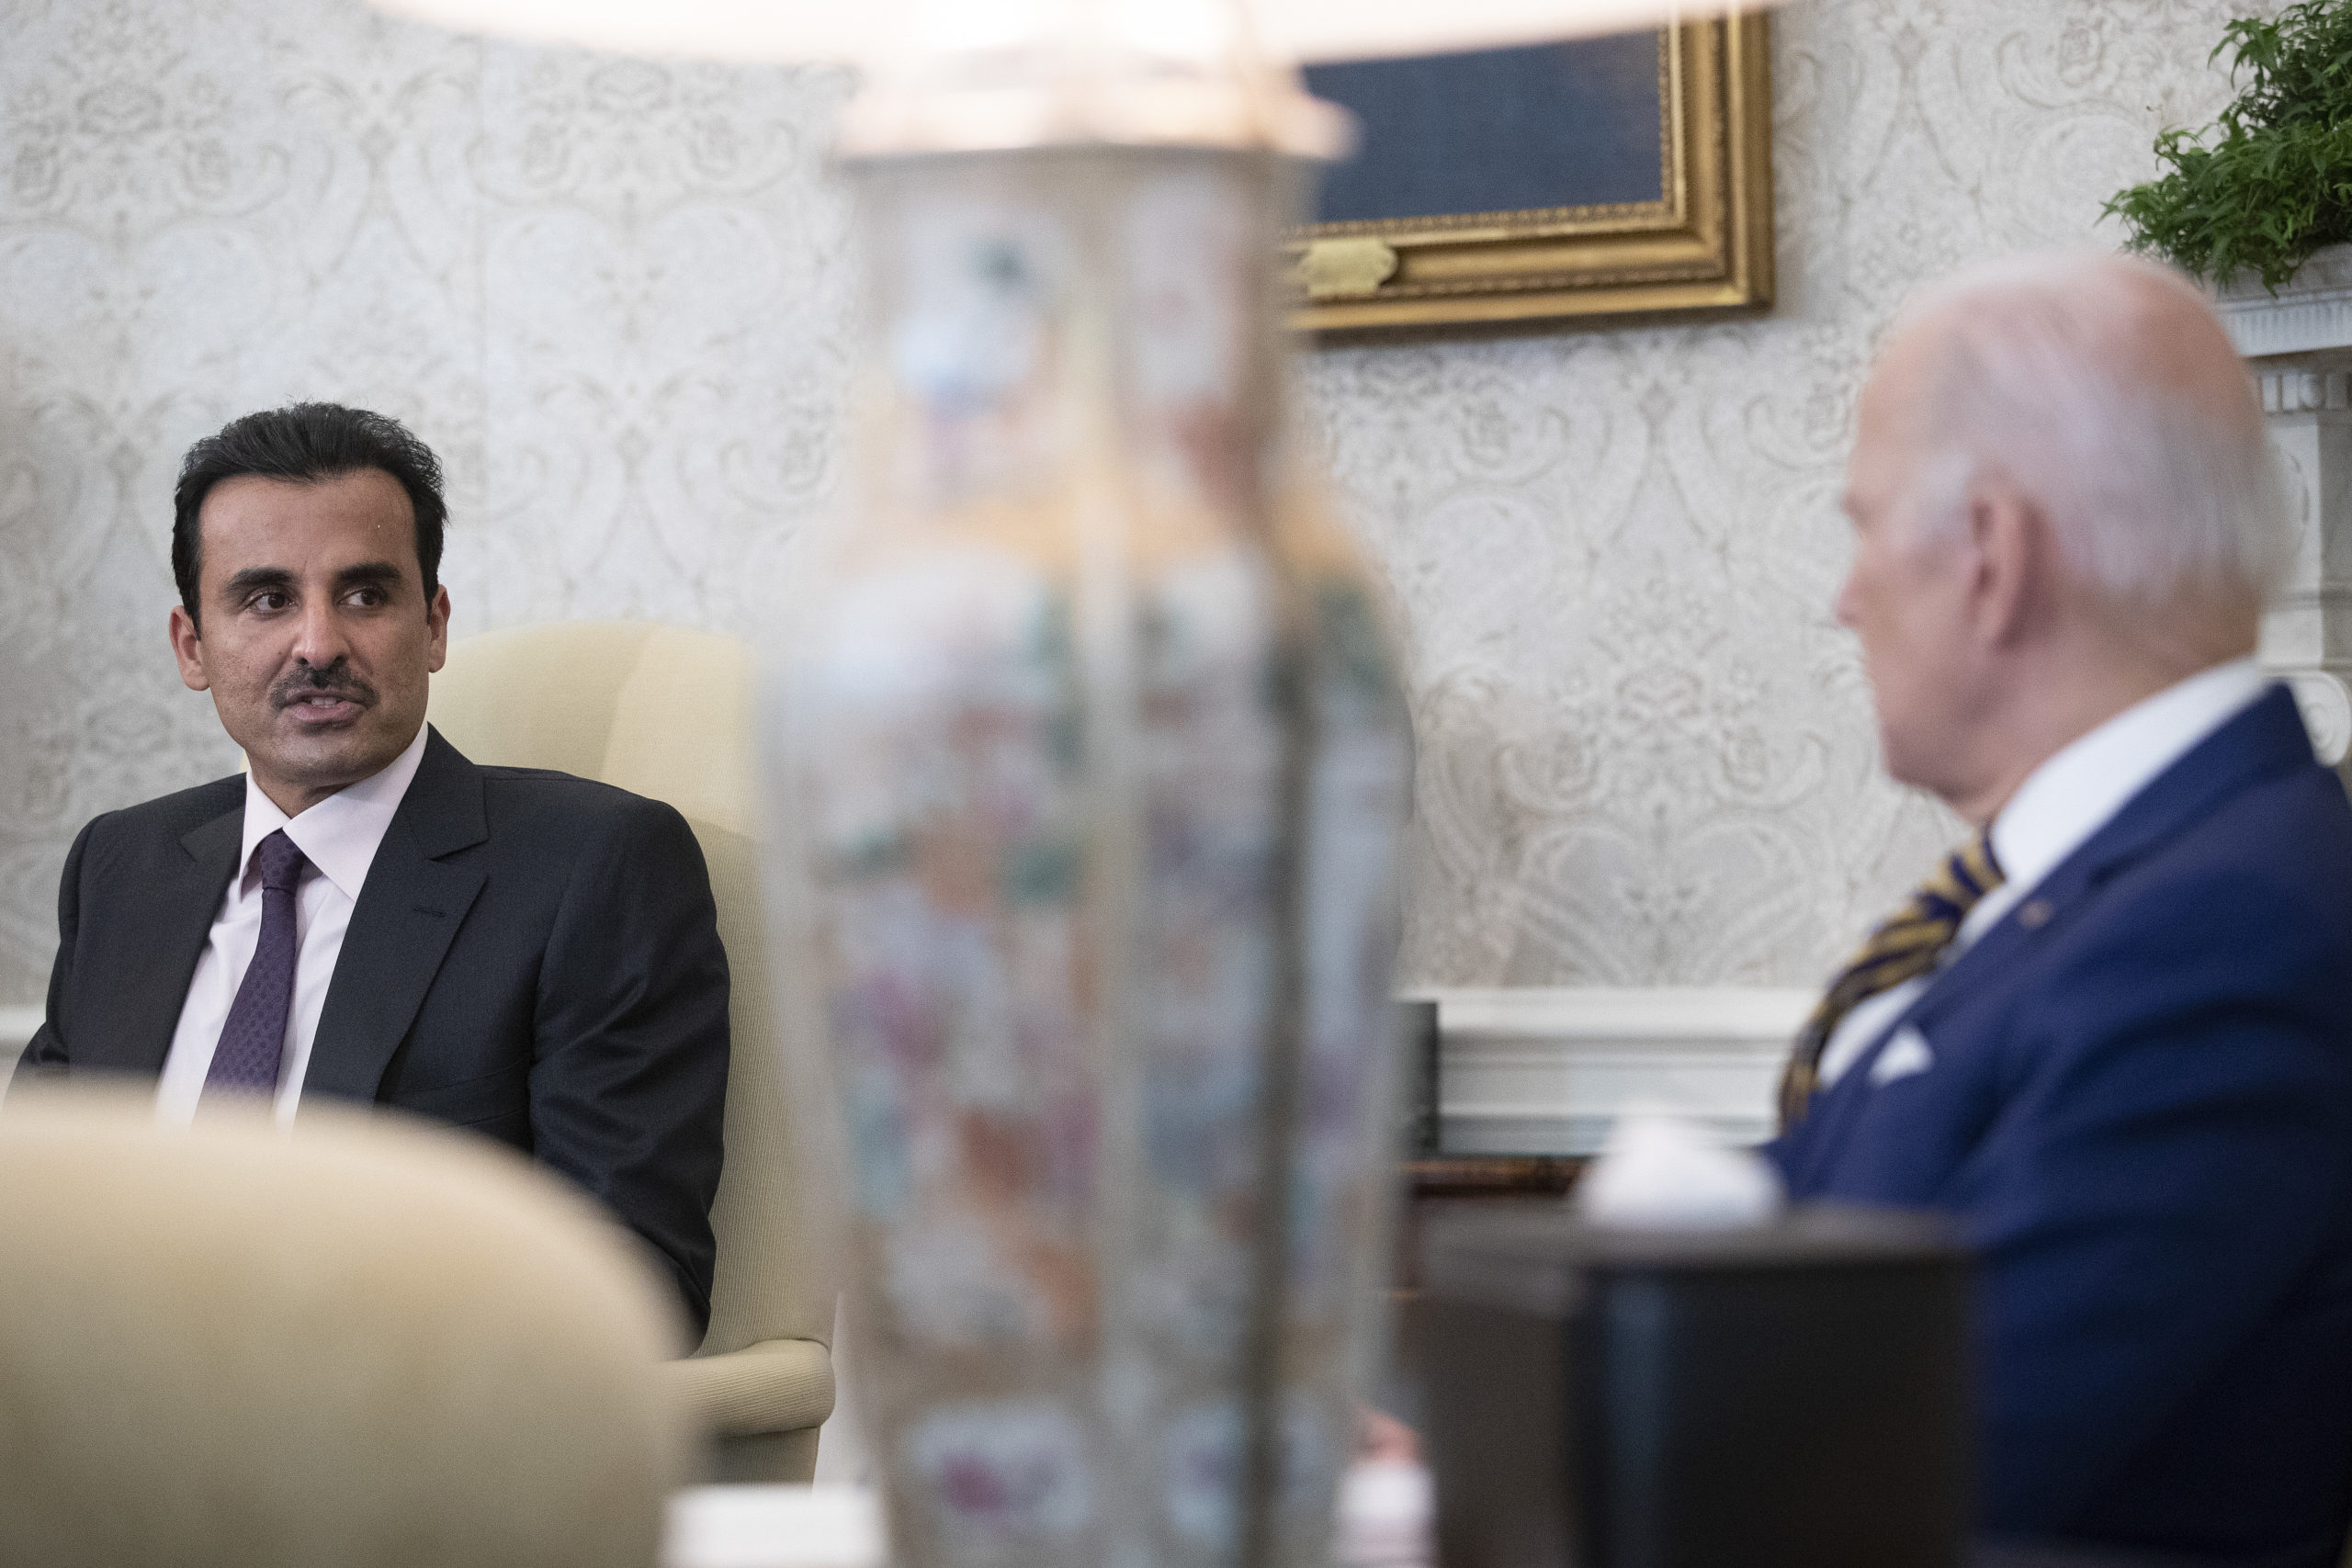 WASHINGTON, DC - JANUARY 31: U.S. President Joe Biden meets with Sheikh Tamim Bin Hamad Al-Thani, Amir of the State of Qatar, in the Oval Office at the White House on January 31, 2022 in Washington, DC. The two leaders were expected to discuss a range of issues, including global energy security as concerns about Russian natural gas supplies continue. (Photo by Tom Brenner-Pool/New York Times/Getty Images)